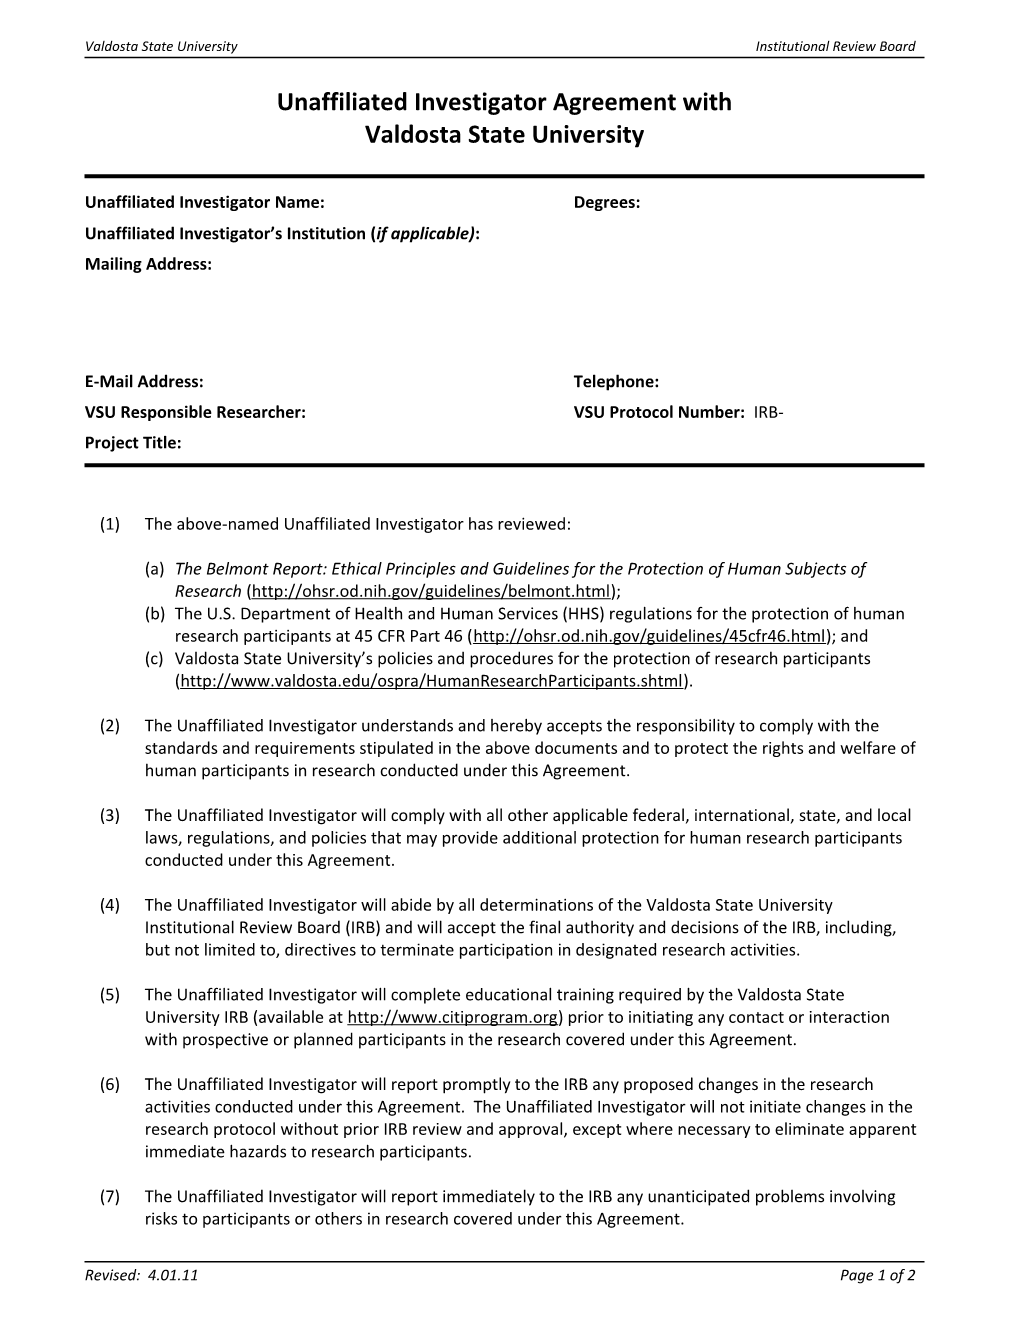 Unaffiliated Investigator Agreement With